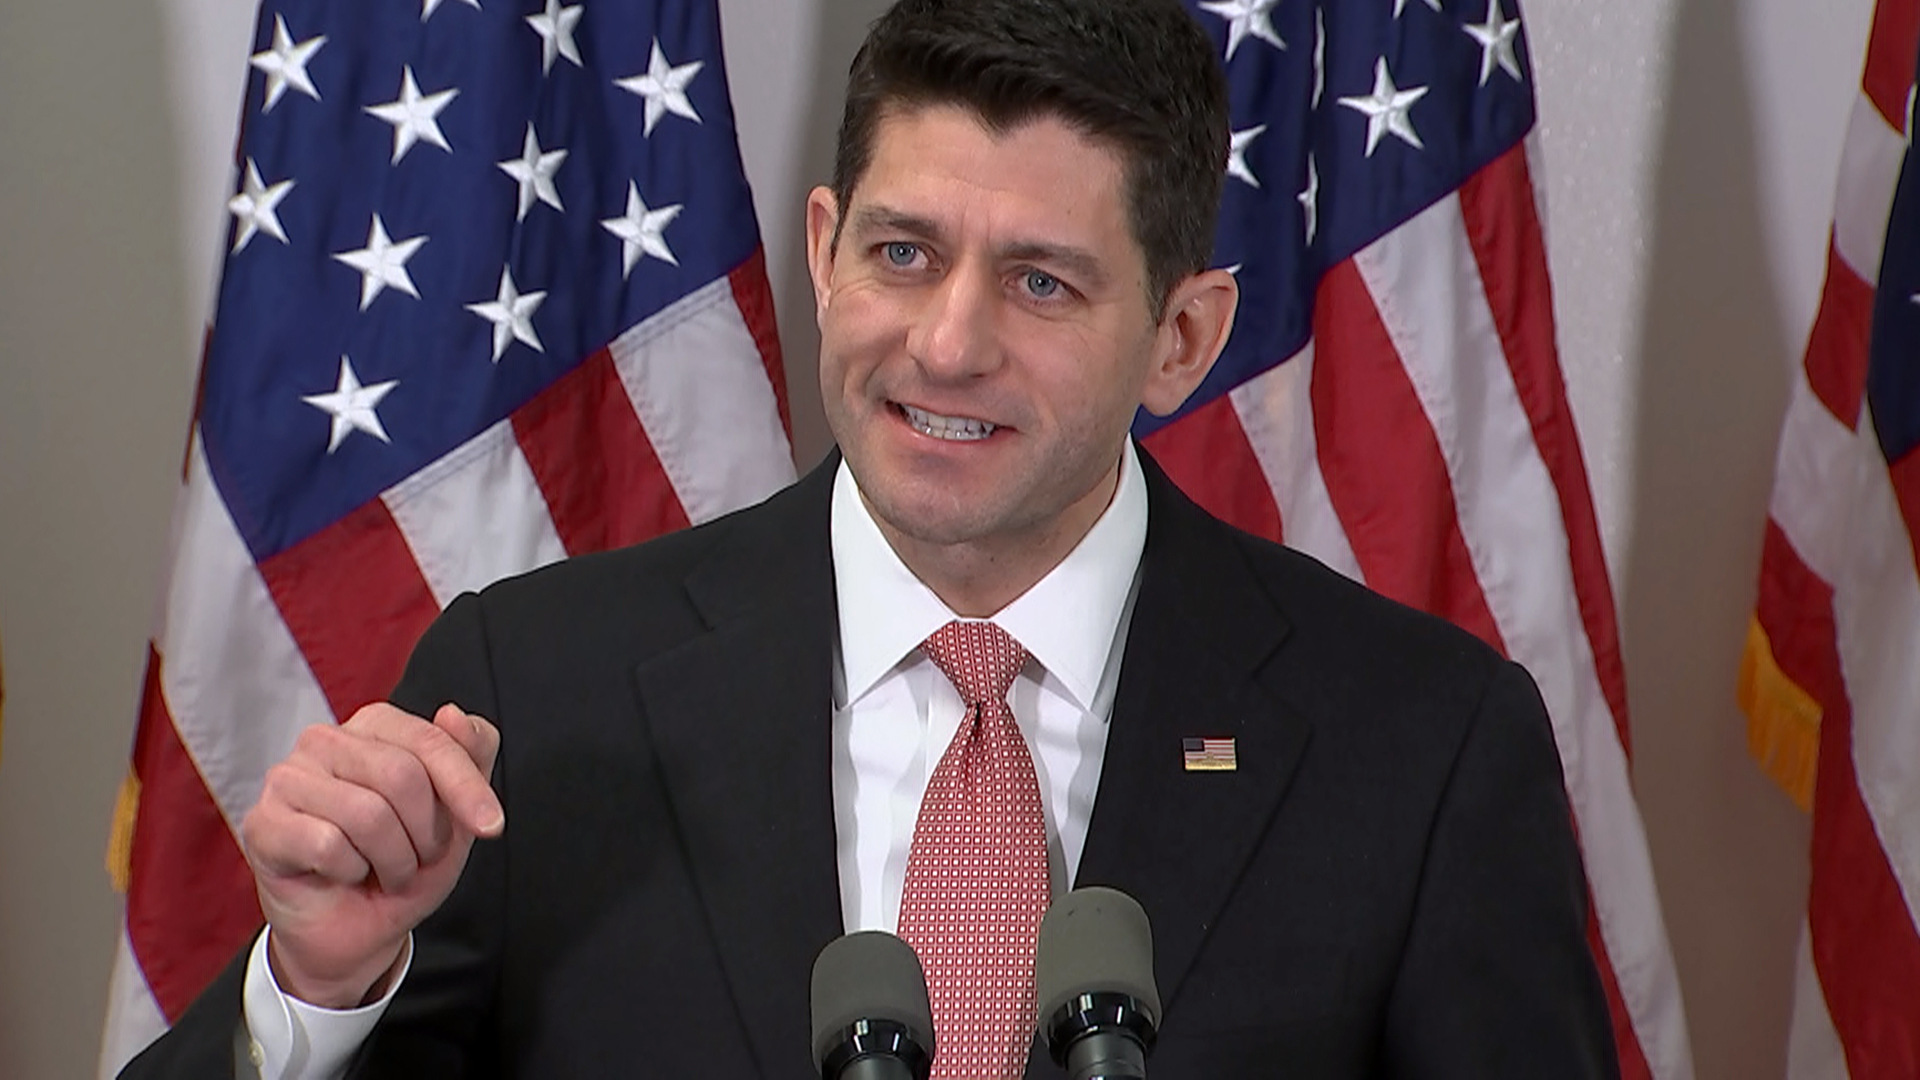 Speaker Ryan Takes Aim at Trump: 'This Is the Party of Lincoln' - NBC News1920 x 1080